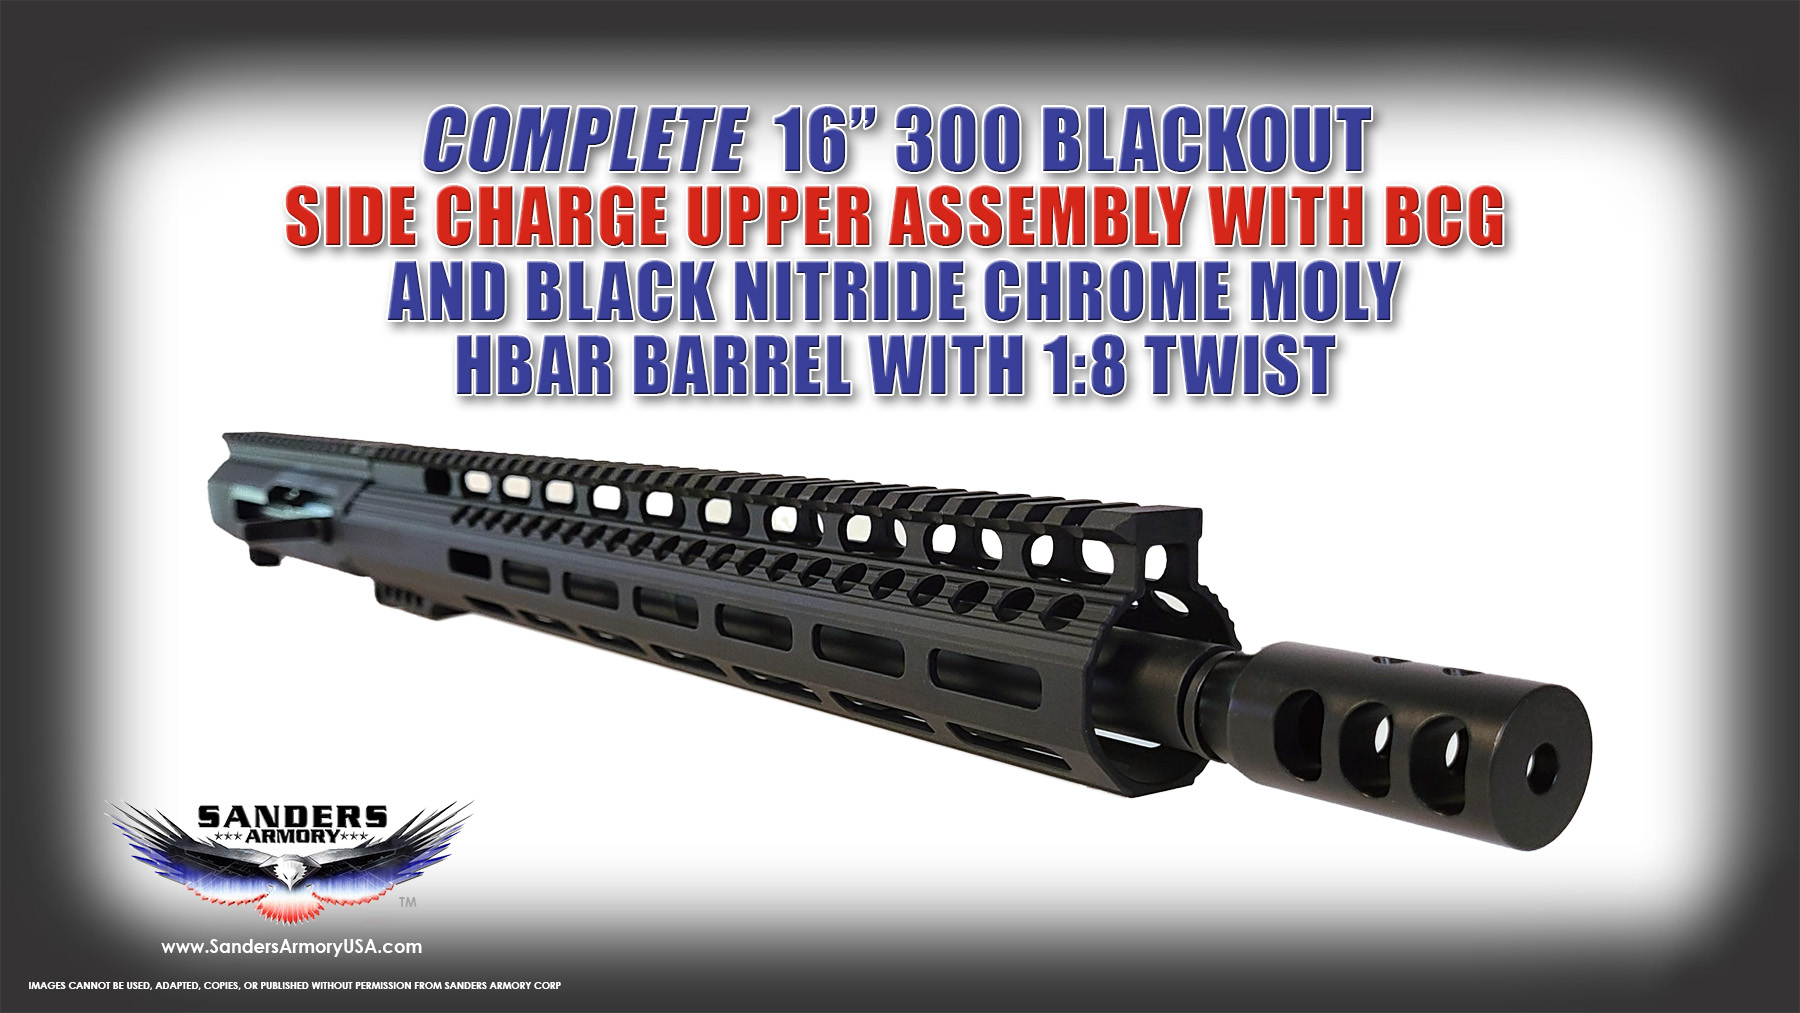 Sanders Armory 16 300 AAC Blackout Black Nitride Chrome Moly Side Charge Upper Assembly